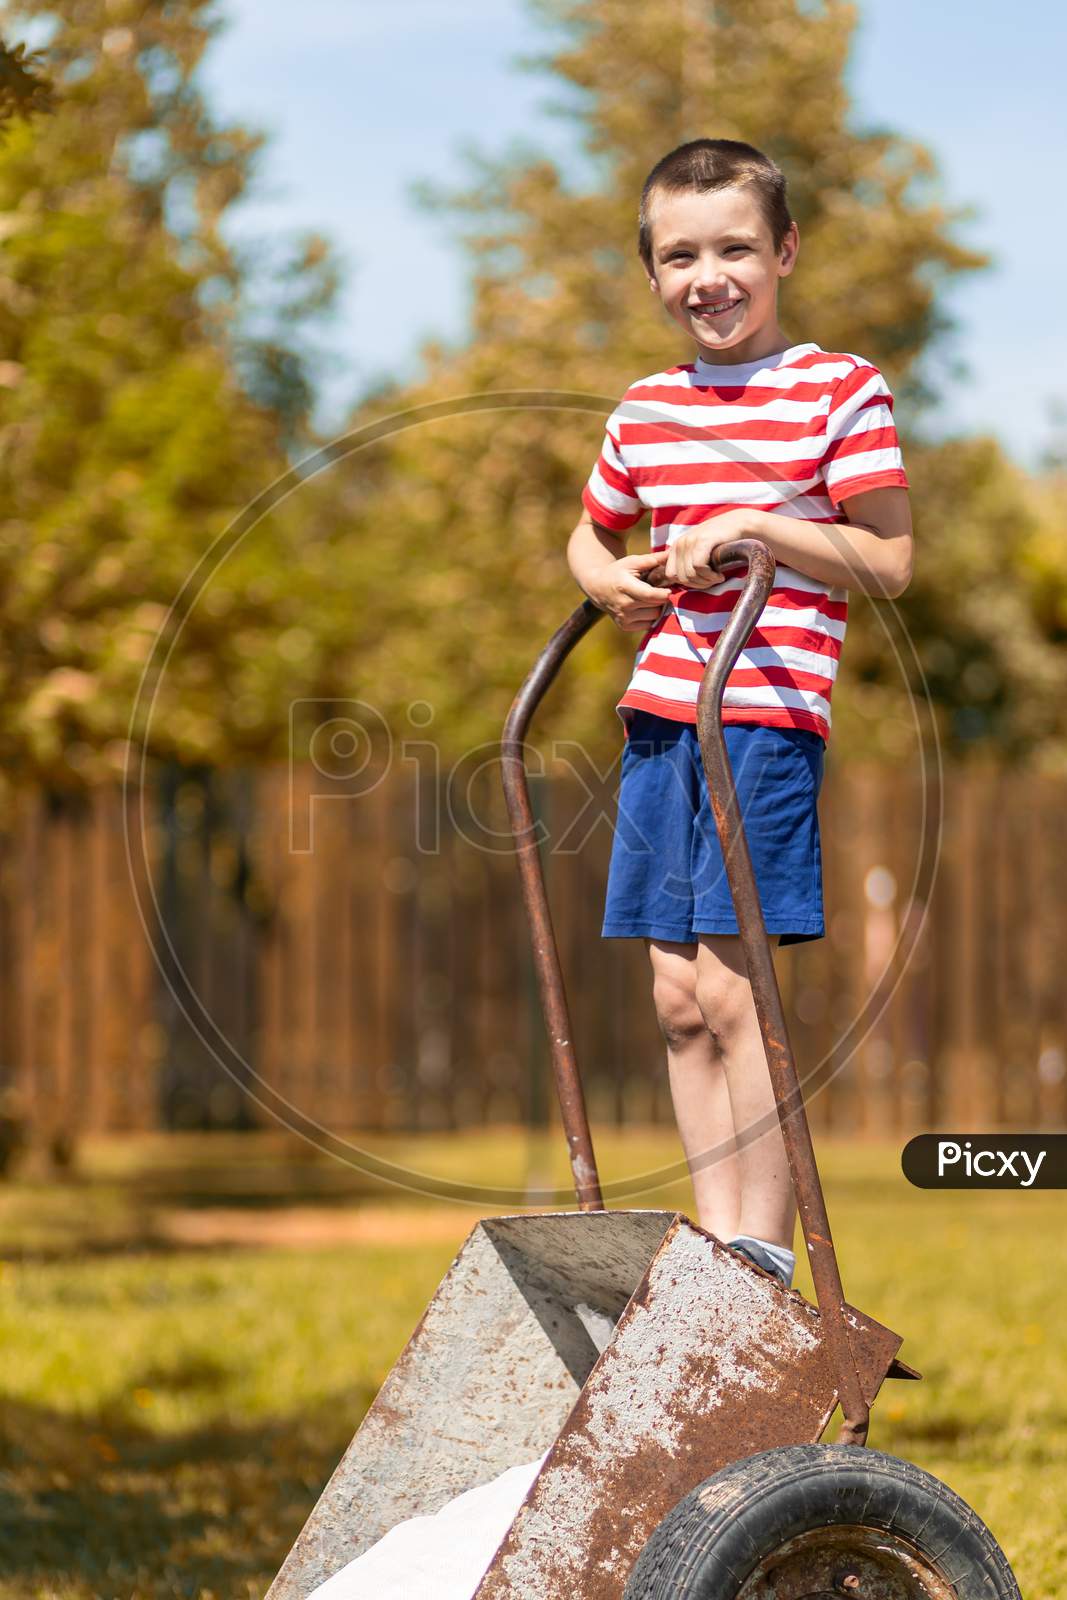 A Little Cheerful Boy Stands On A Garden Wheelbarrow And In The Garden Of A Country House. Little Helper Boy Ready To Work